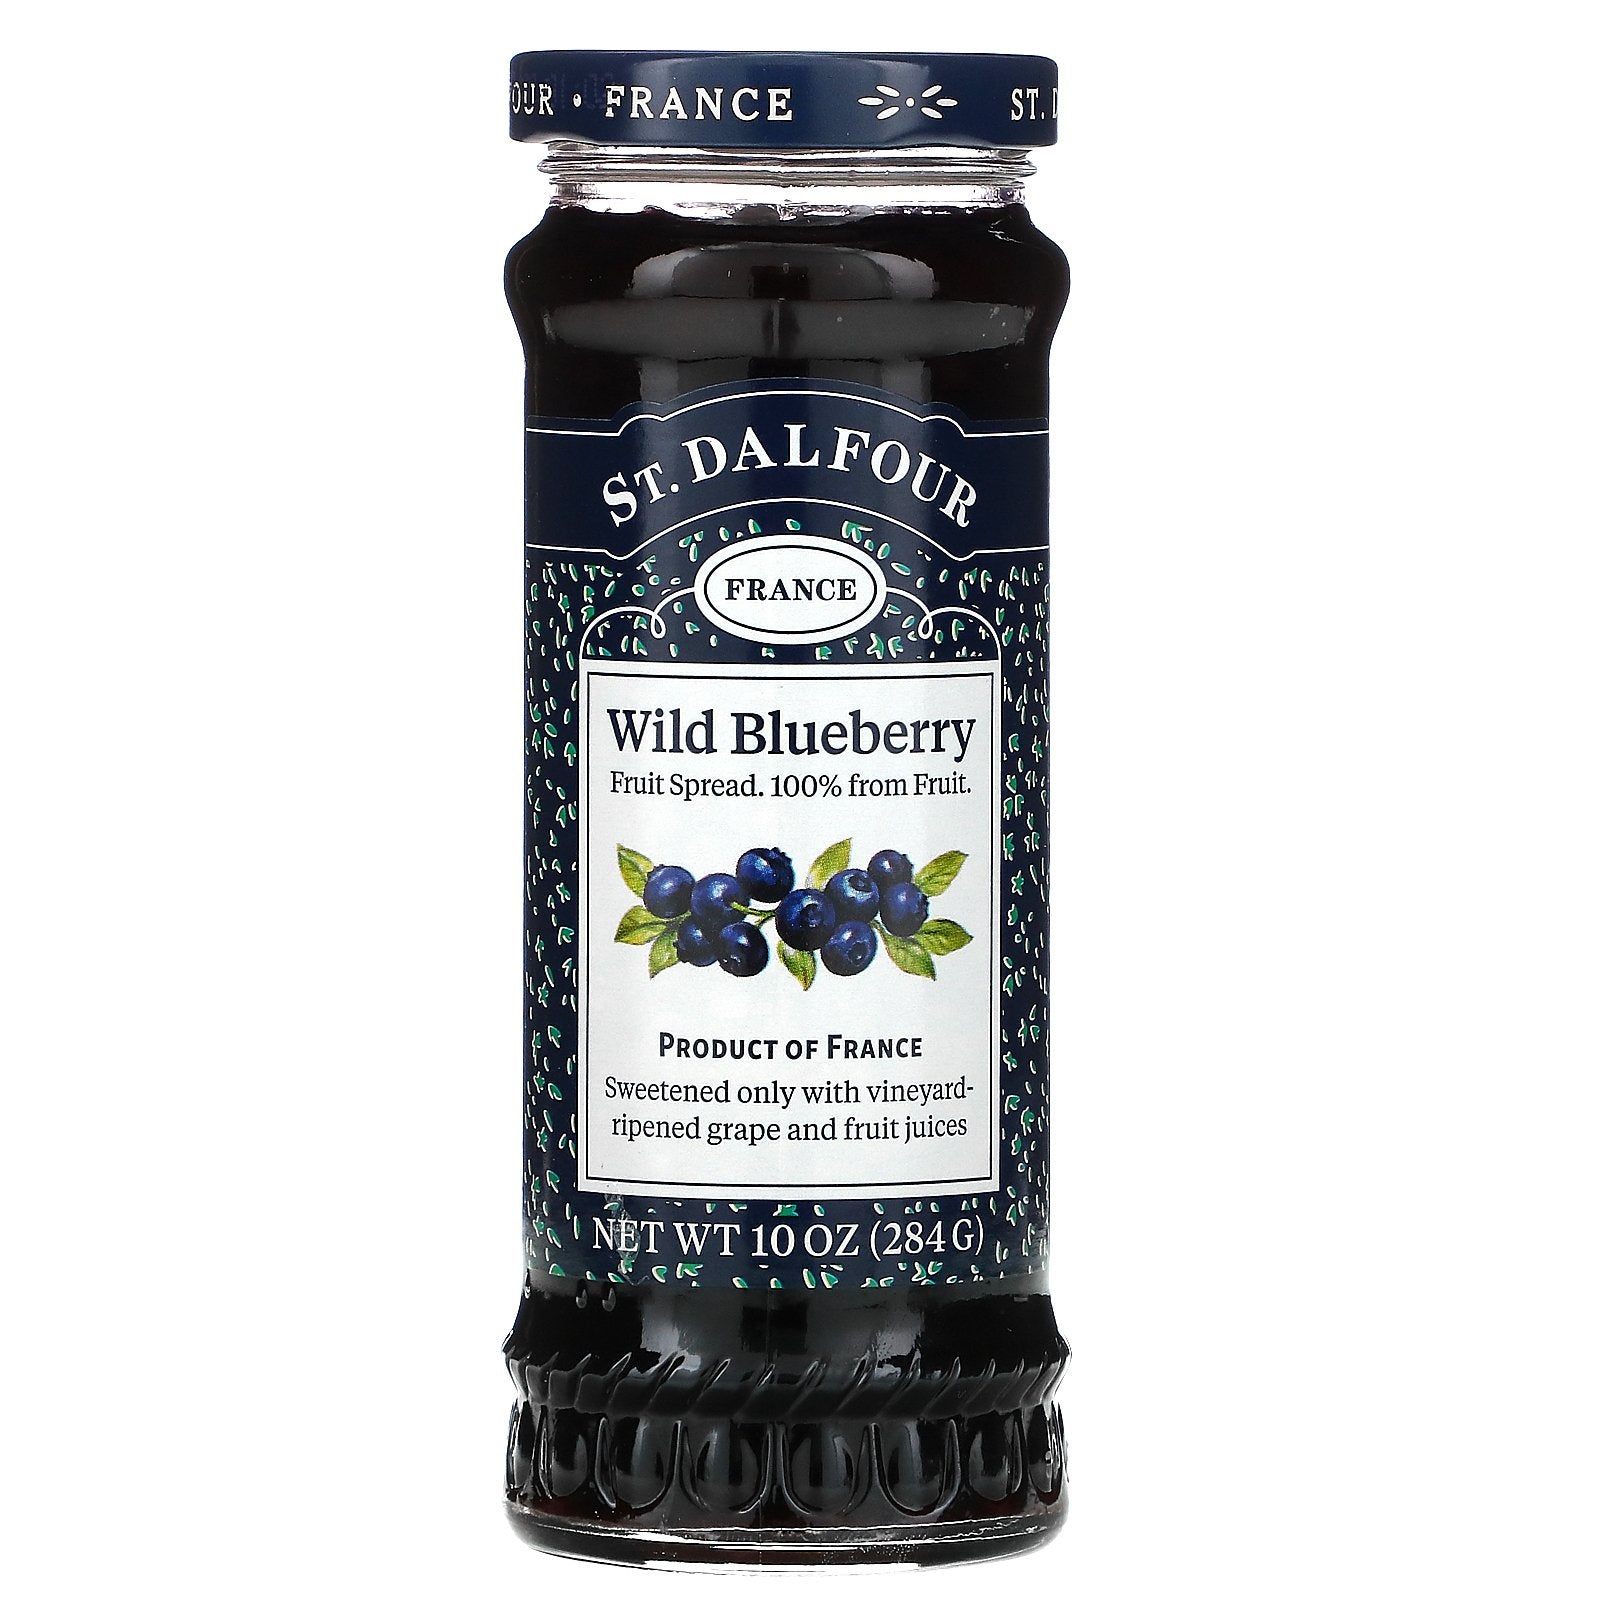 St Dalfour Blueberry Fruit Spread 284g